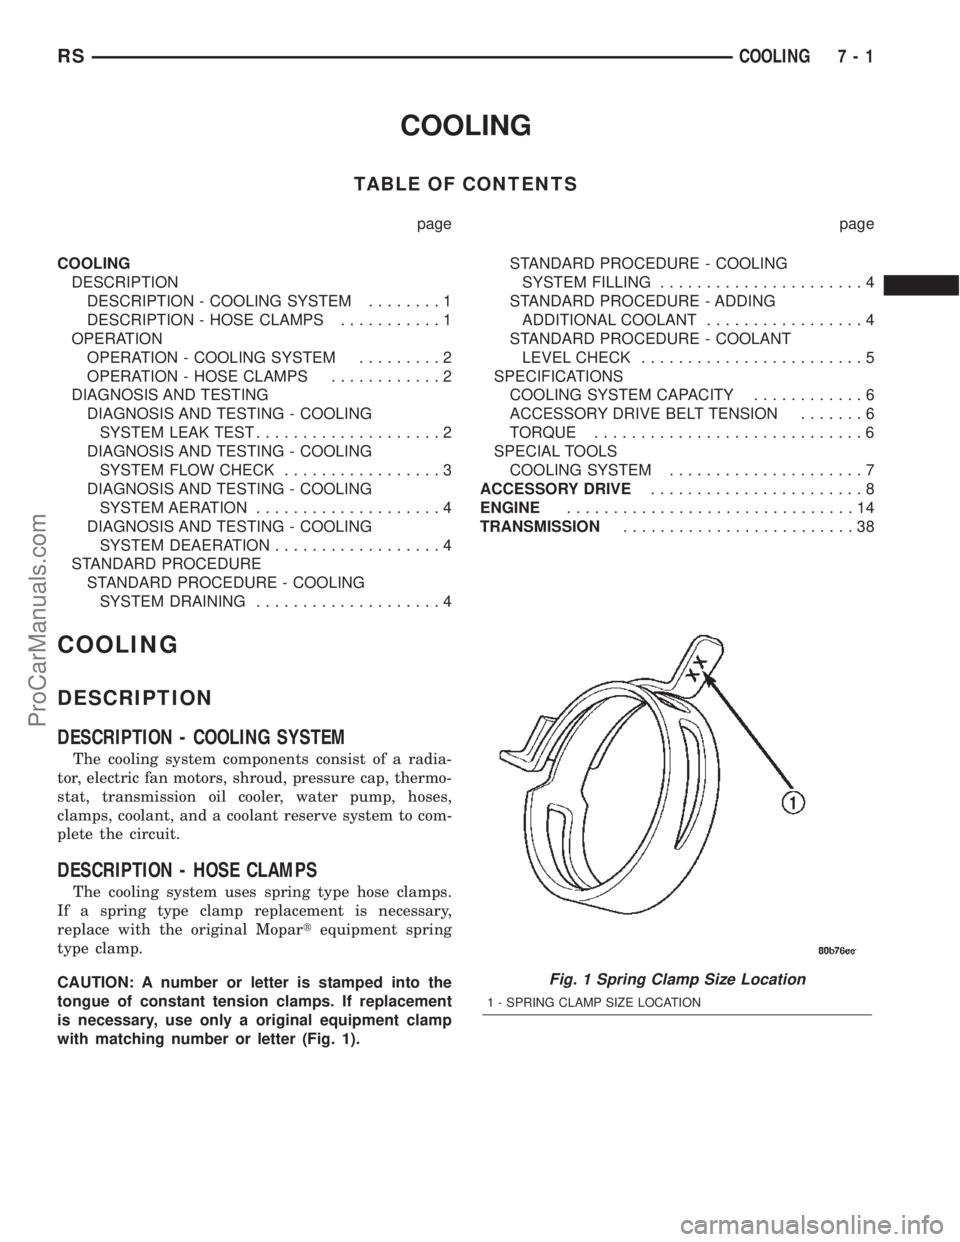 DODGE TOWN AND COUNTRY 2002  Service Manual COOLING
TABLE OF CONTENTS
page page
COOLING
DESCRIPTION
DESCRIPTION - COOLING SYSTEM........1
DESCRIPTION - HOSE CLAMPS...........1
OPERATION
OPERATION - COOLING SYSTEM.........2
OPERATION - HOSE CLAM